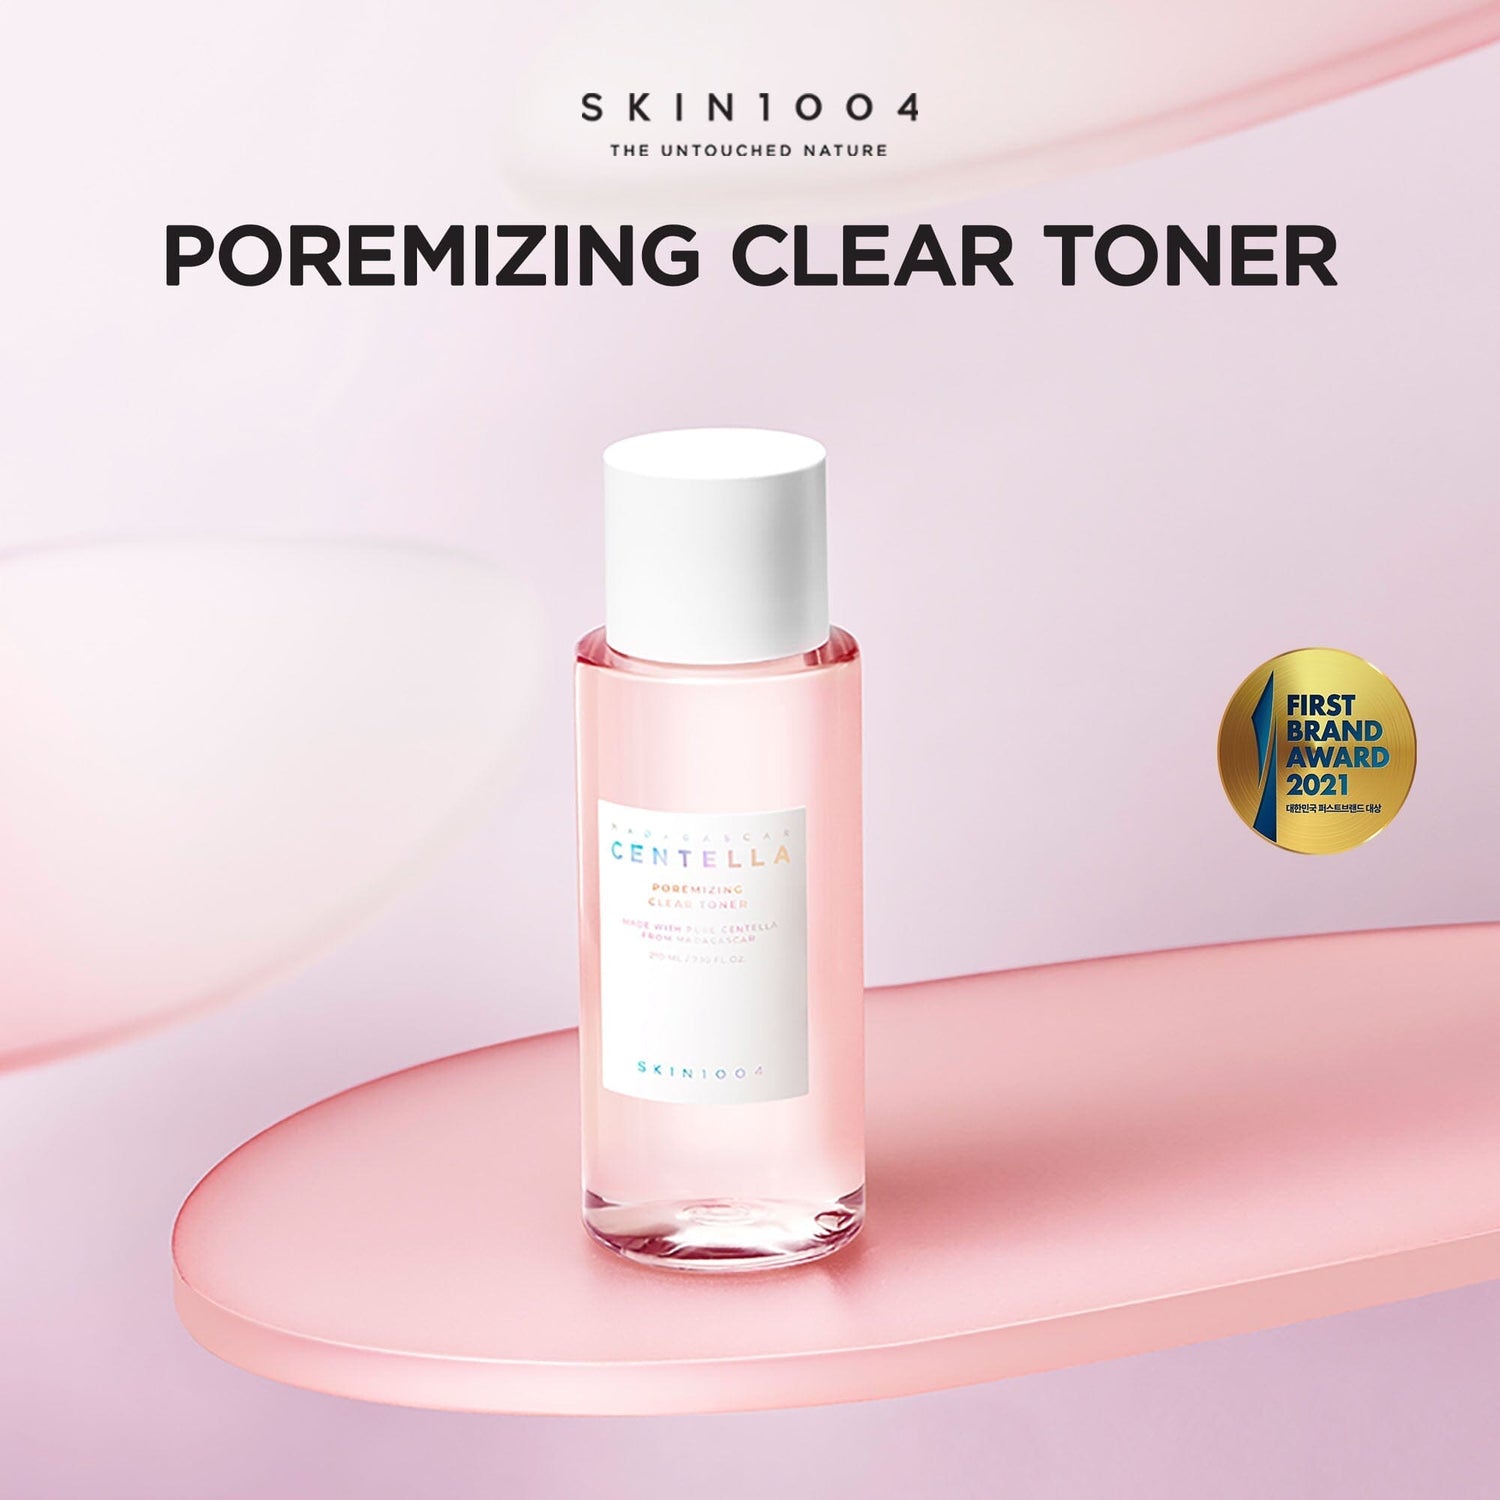 SKIN1004 Madagascar Centella Poremizing Clear Toner ( Pouch Sample ), at Orion Beauty. SKIN1004 Official Sole Authorized Retailer in Sri Lanka!